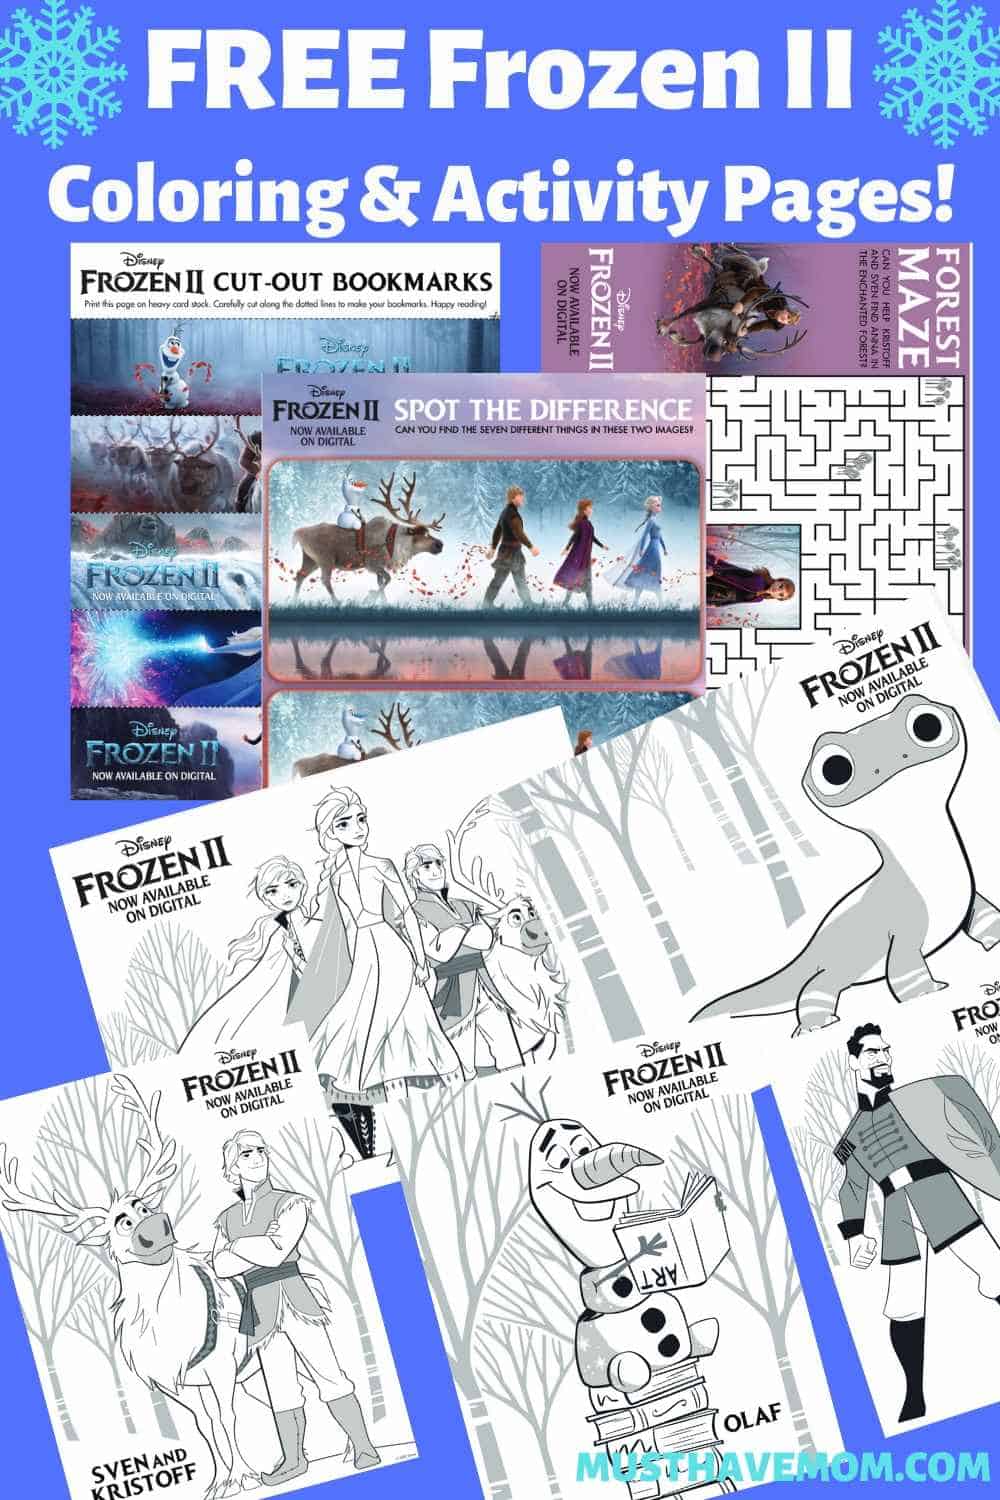 FREE Frozen 2 Coloring Pages + Activity Sheets {Printable}